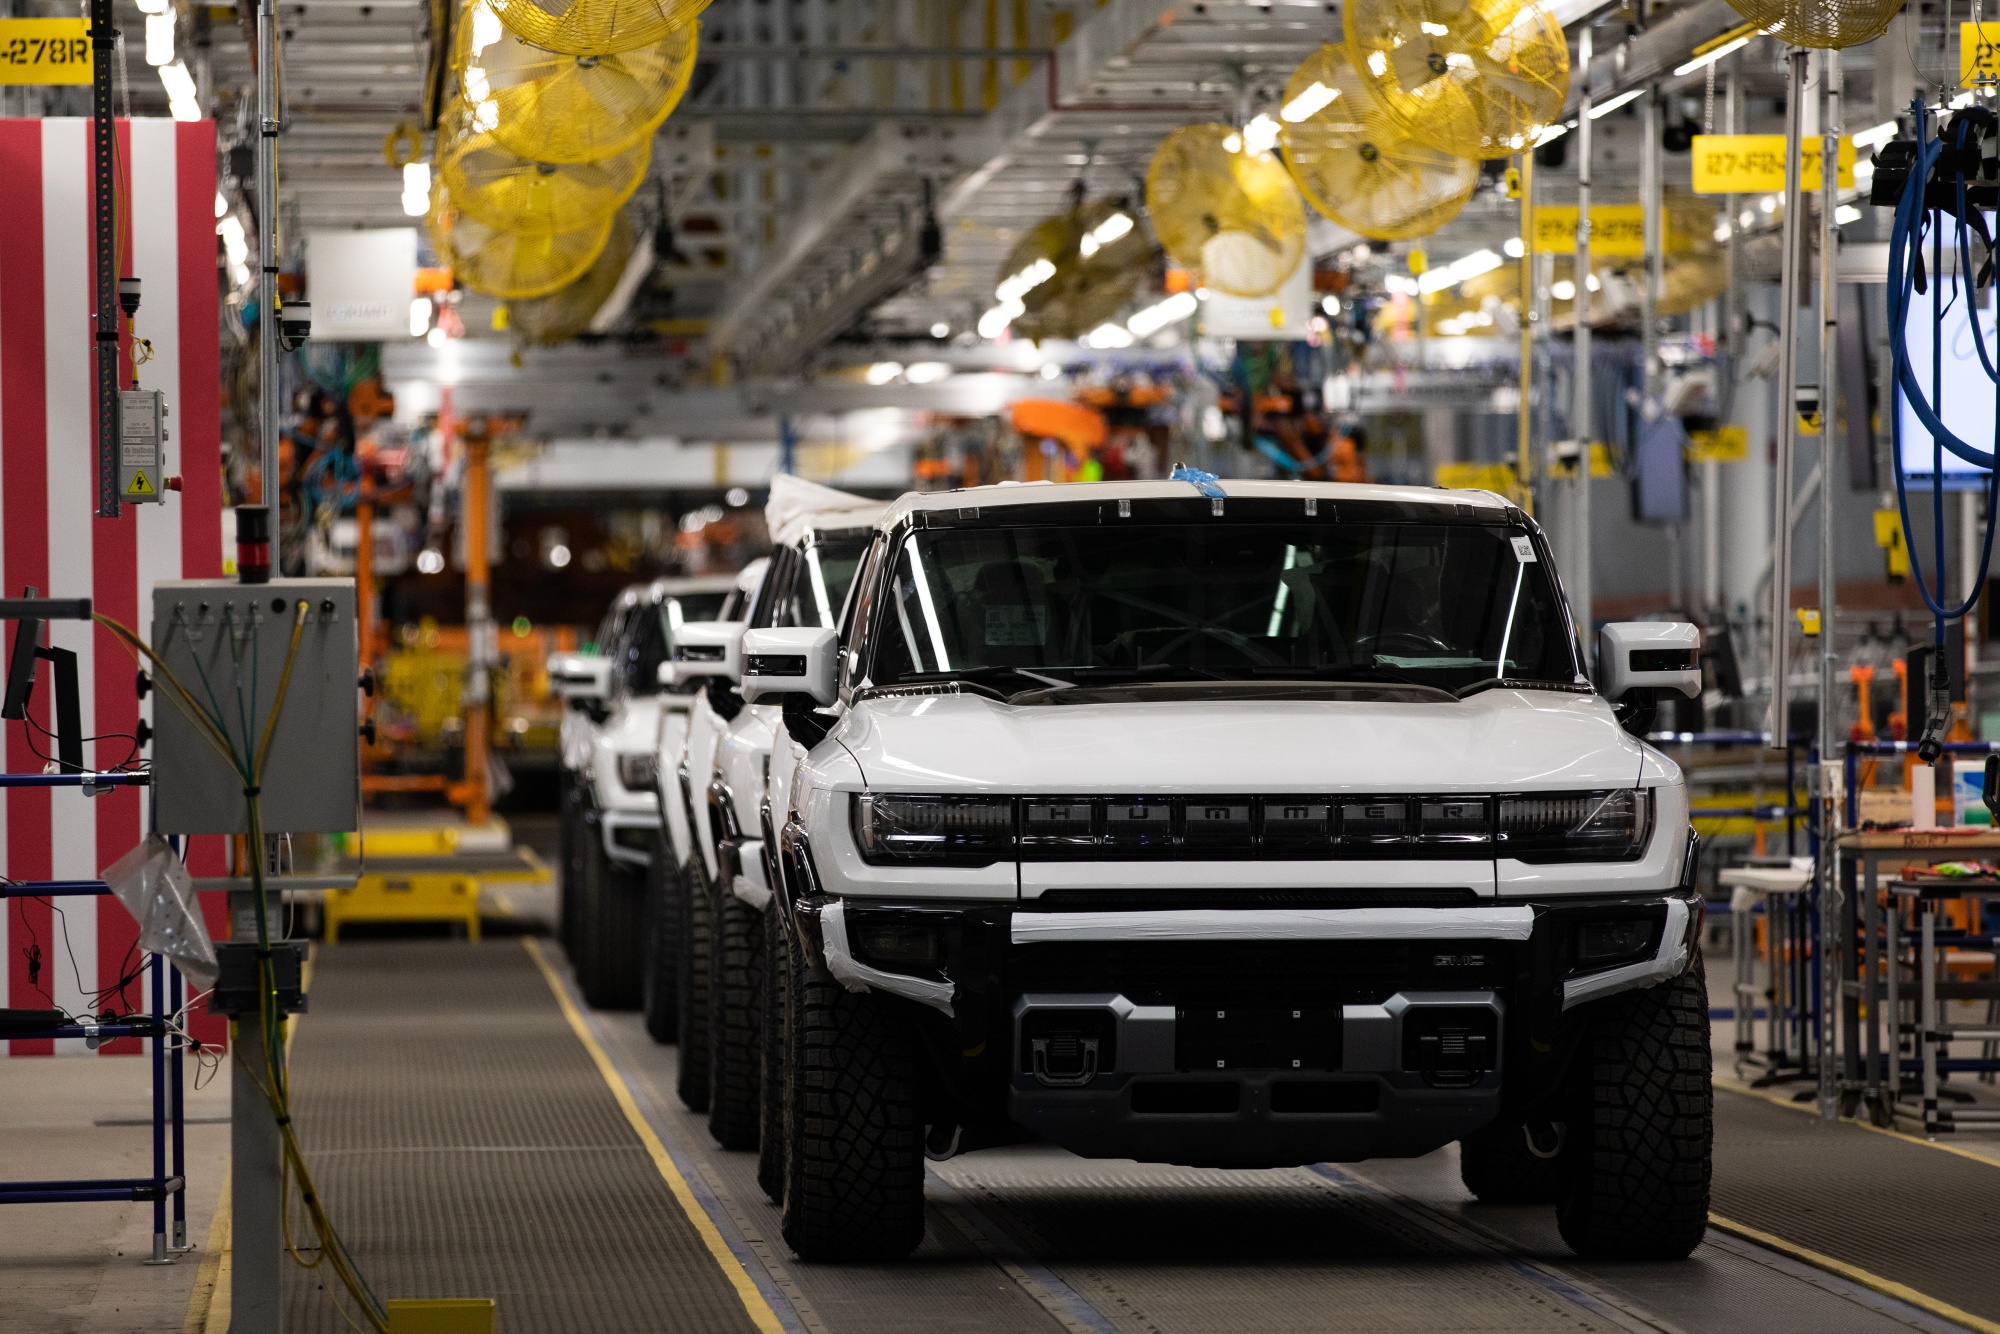 GMC Hummer electric vehicles on the production line at General Motors' Factory ZERO all-electric vehicle assembly plant in Detroit, Michigan.